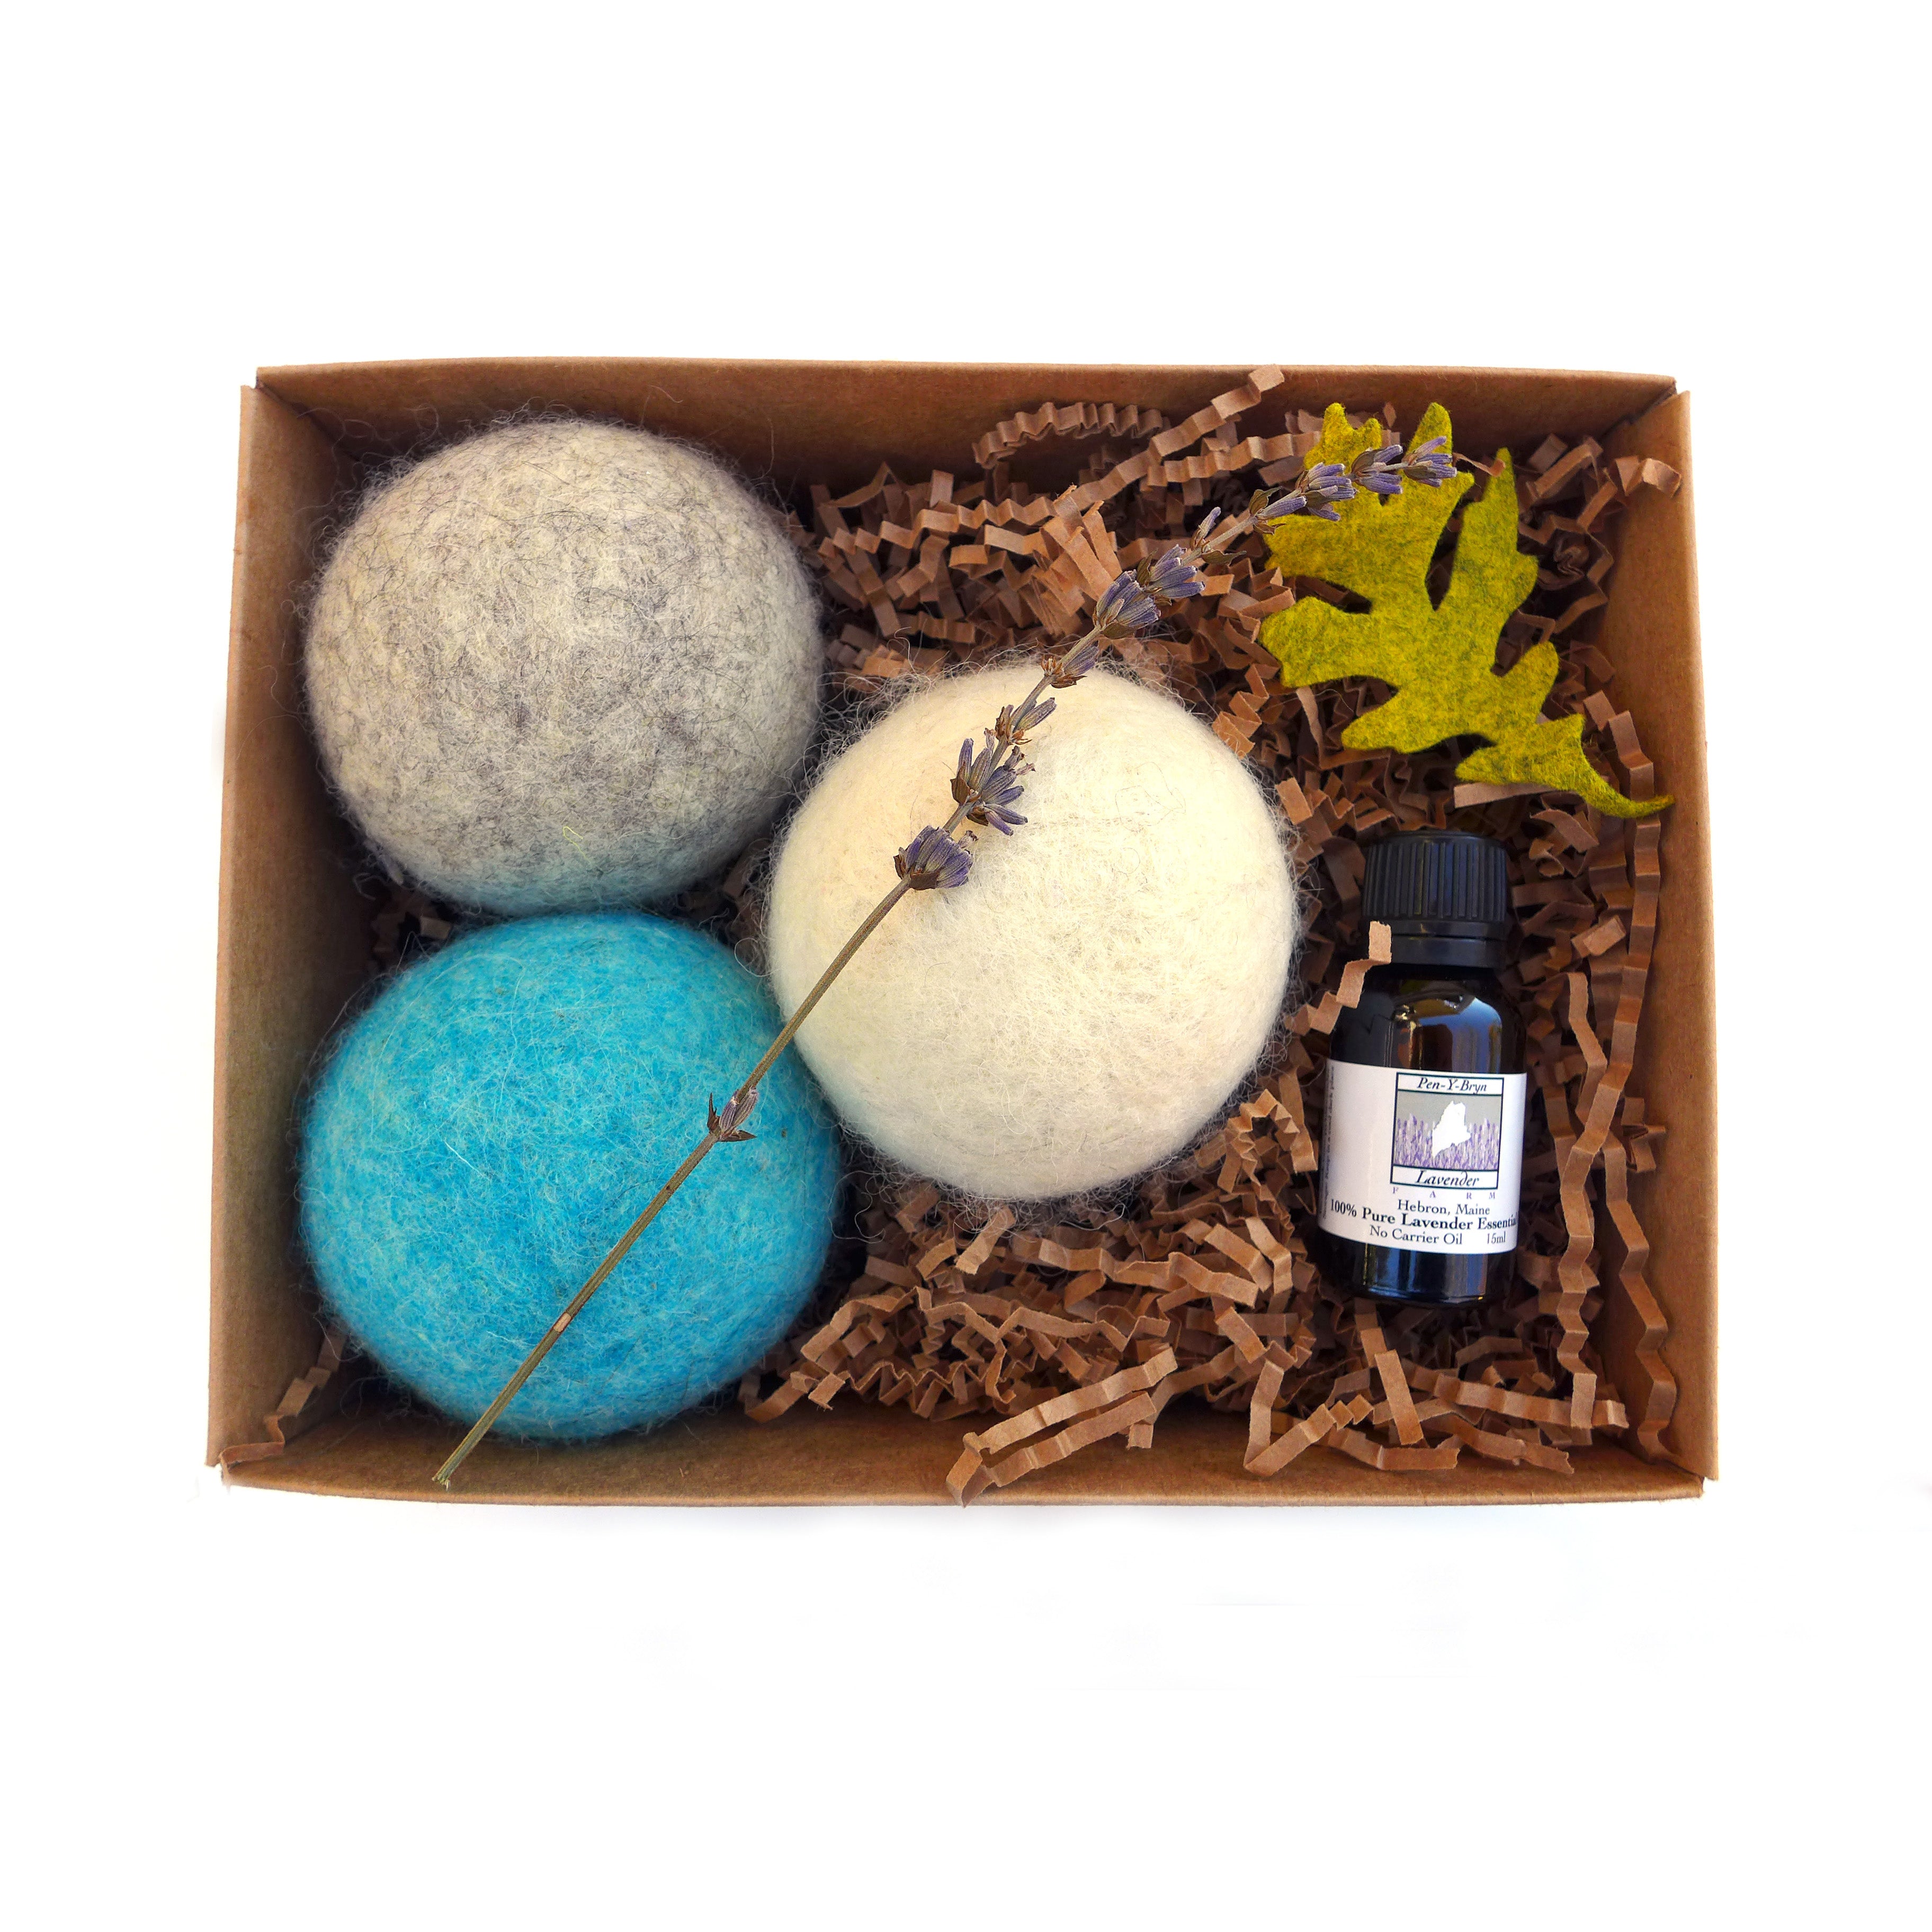 DIY Essential Oil Wool Dryer Ball Blend Recipe For Laundry